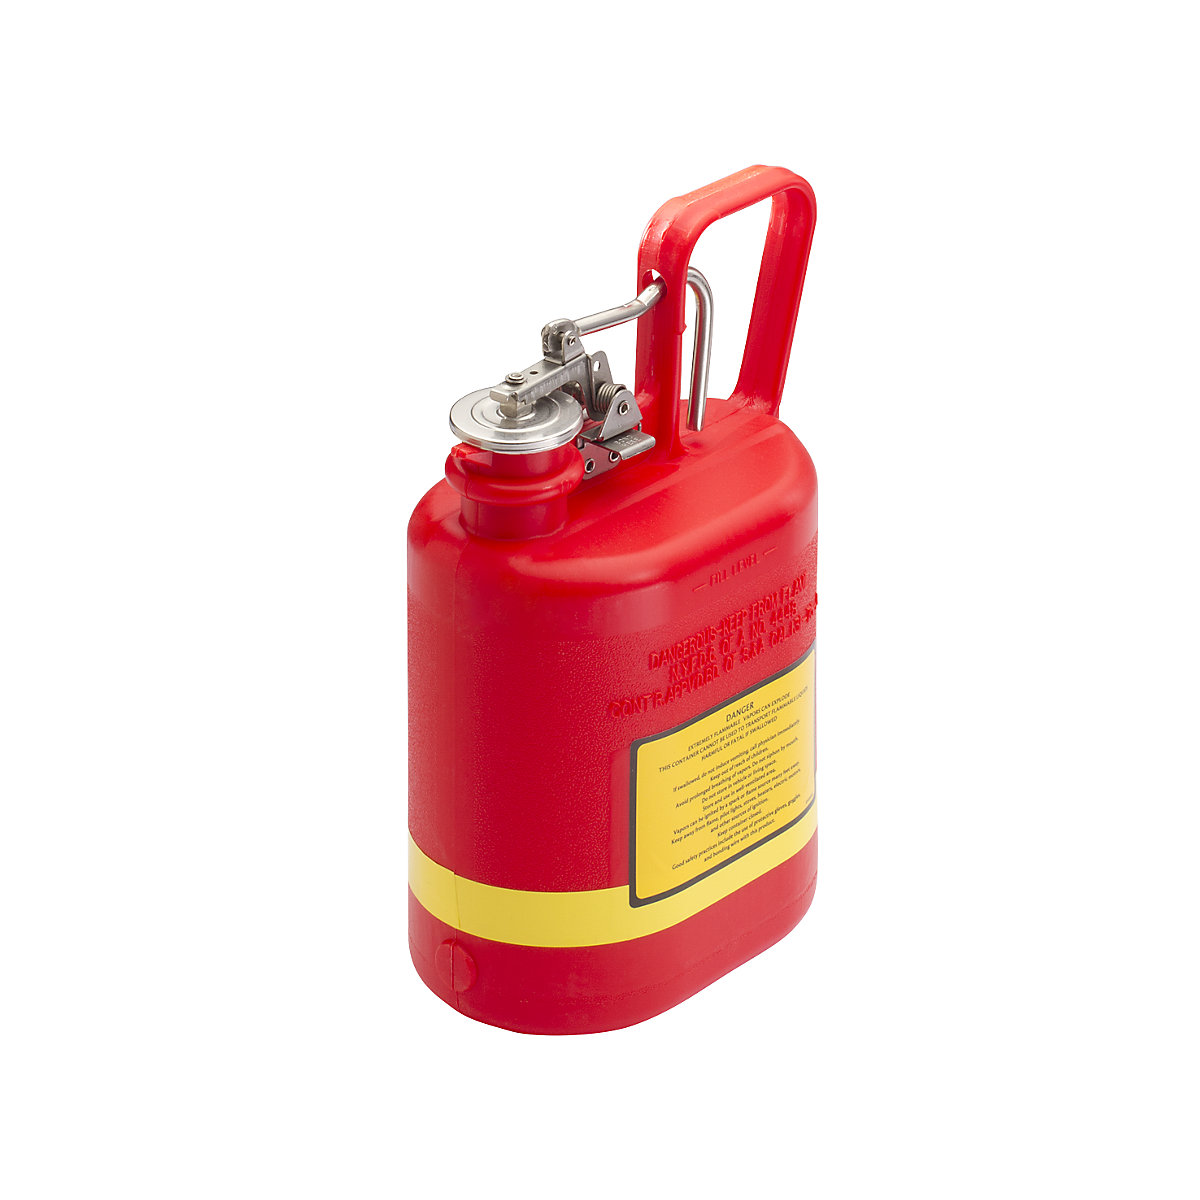 PE safety container – Justrite